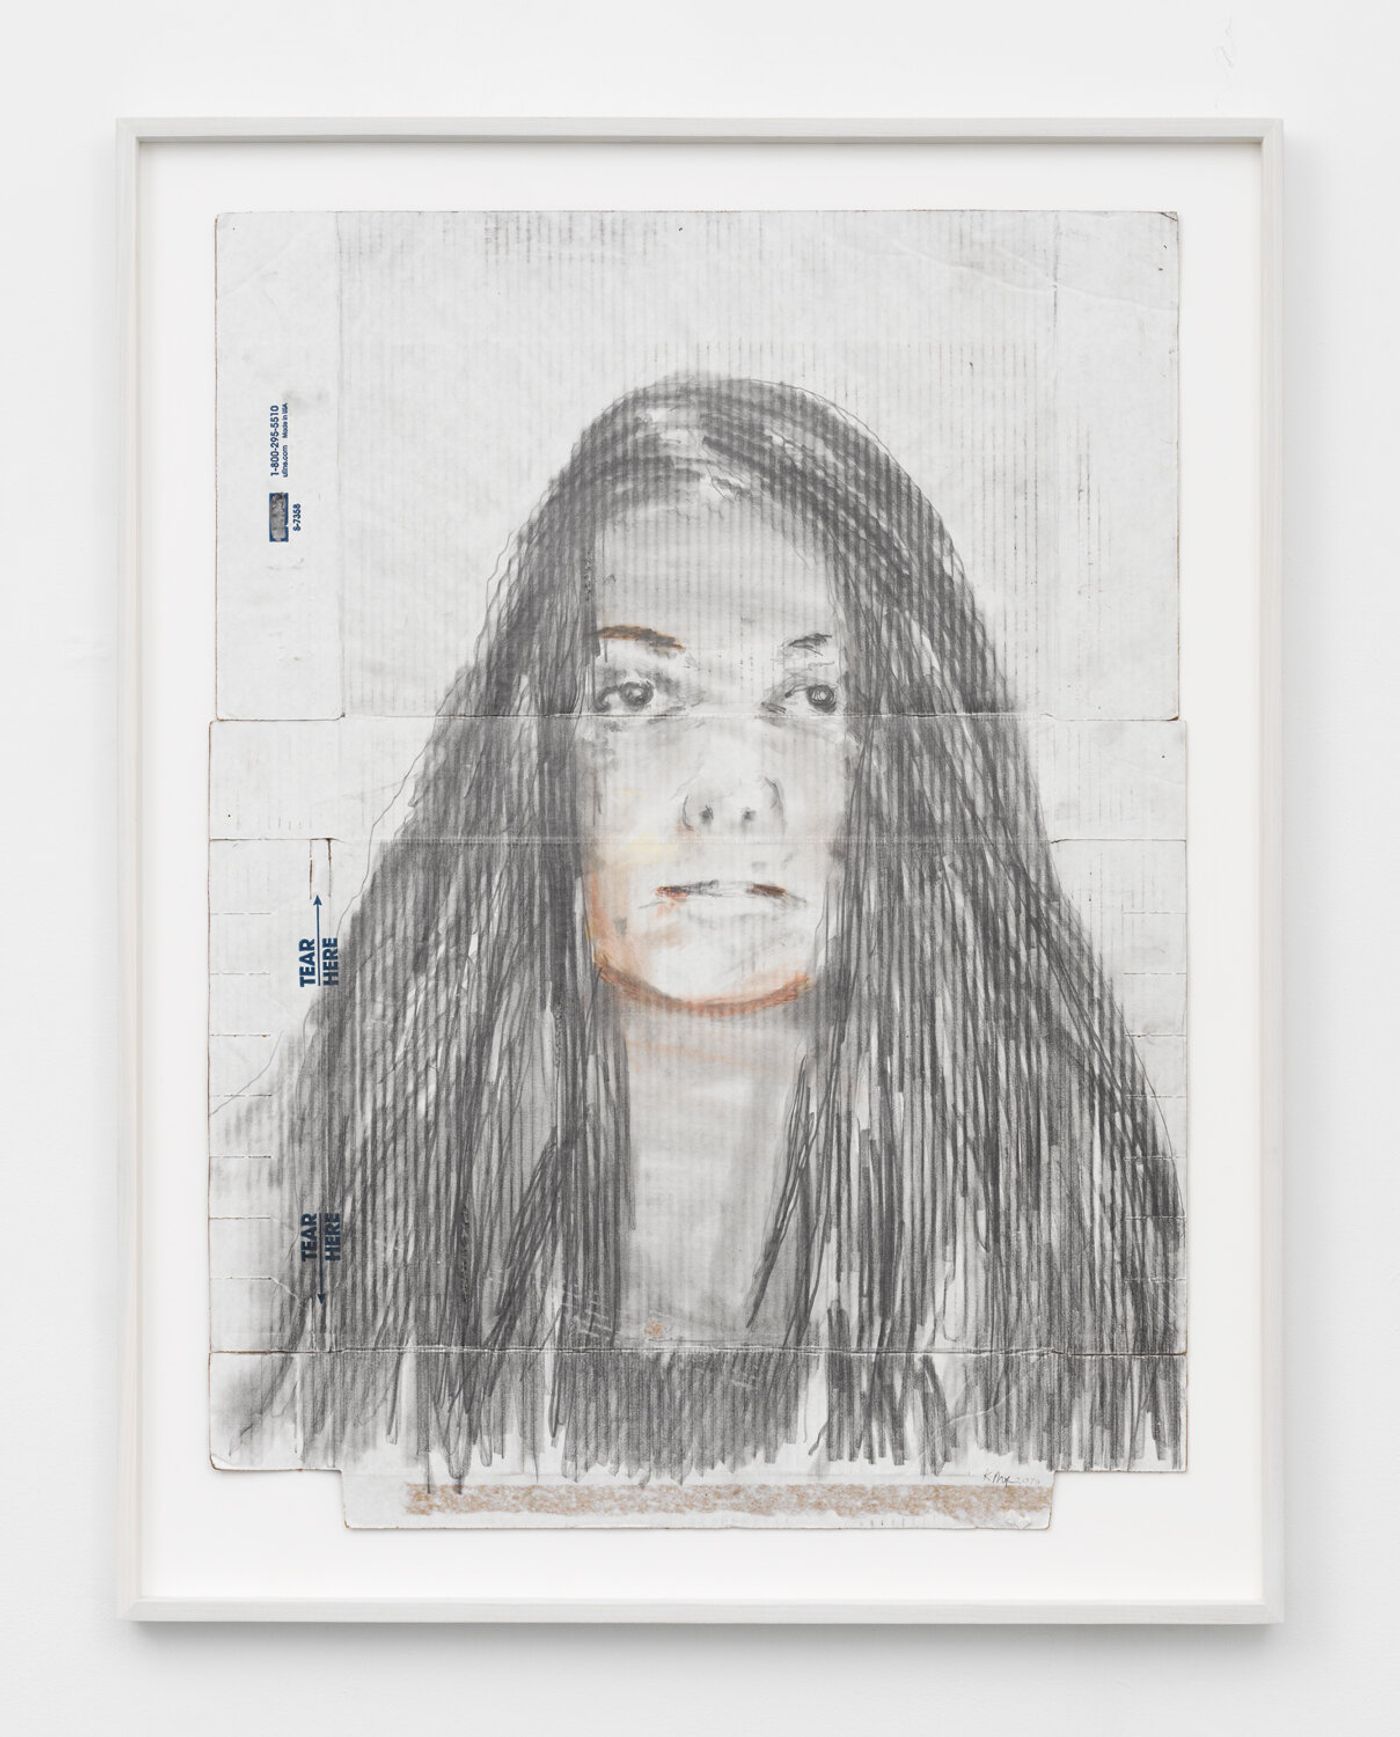 Image of Baby_seal777, 2019: Graphite on found white cardboard